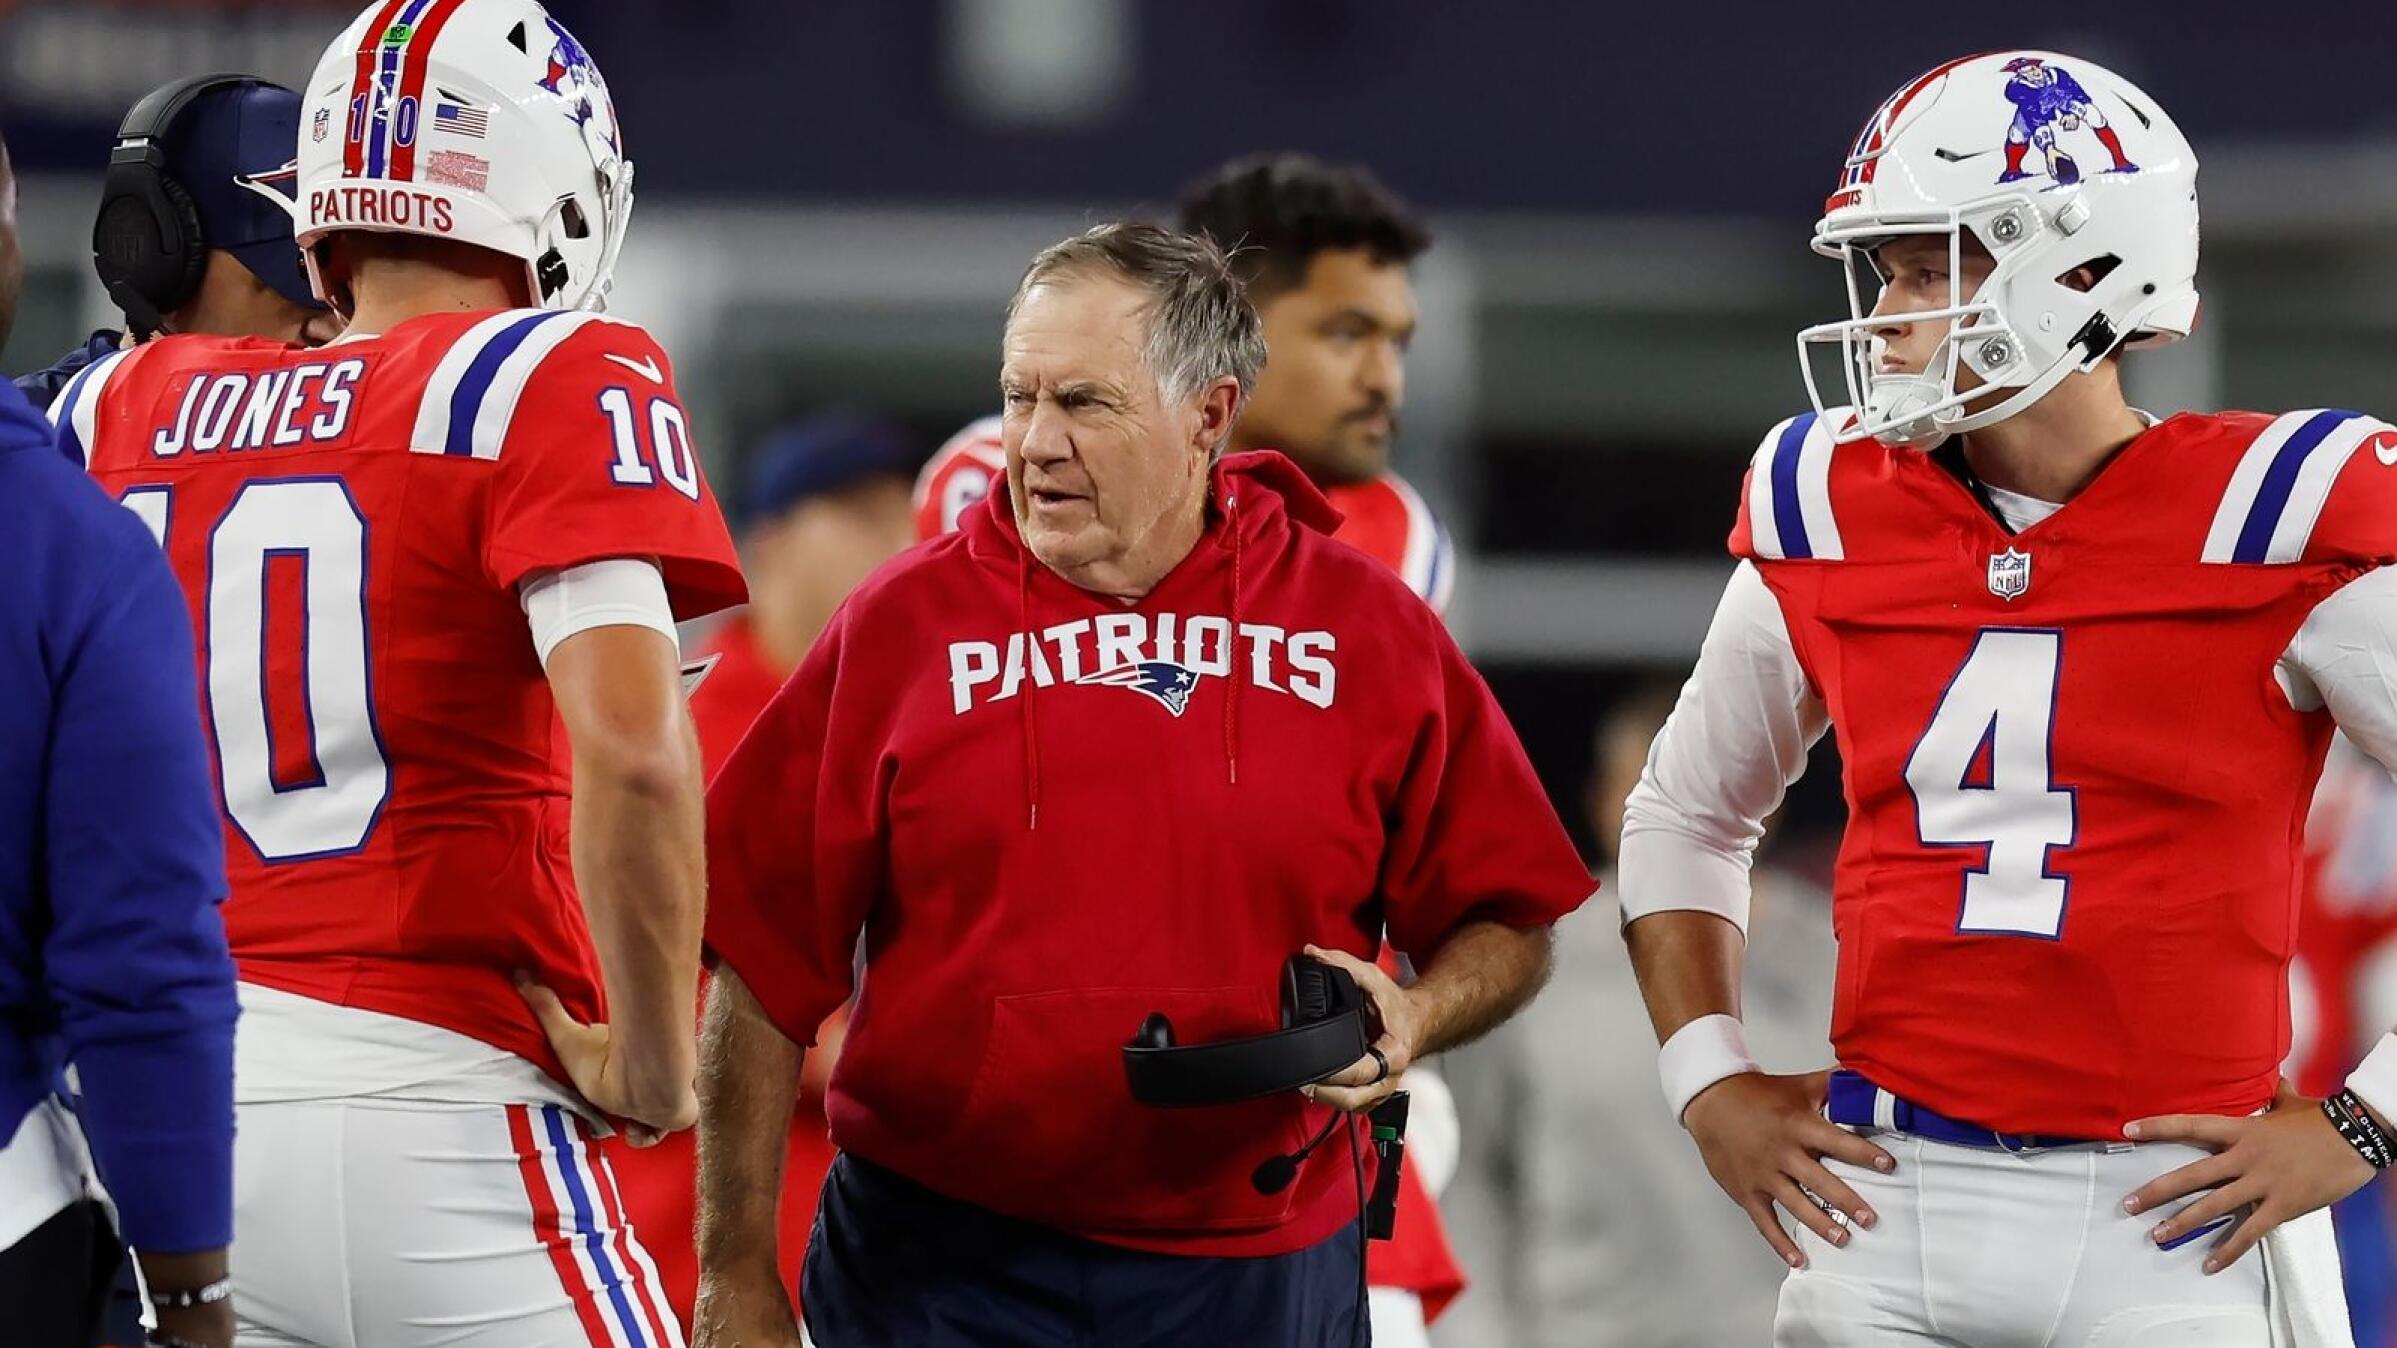 Patriots are clear on their issues and will try to avoid the second 0-3  start of Belichick's tenure